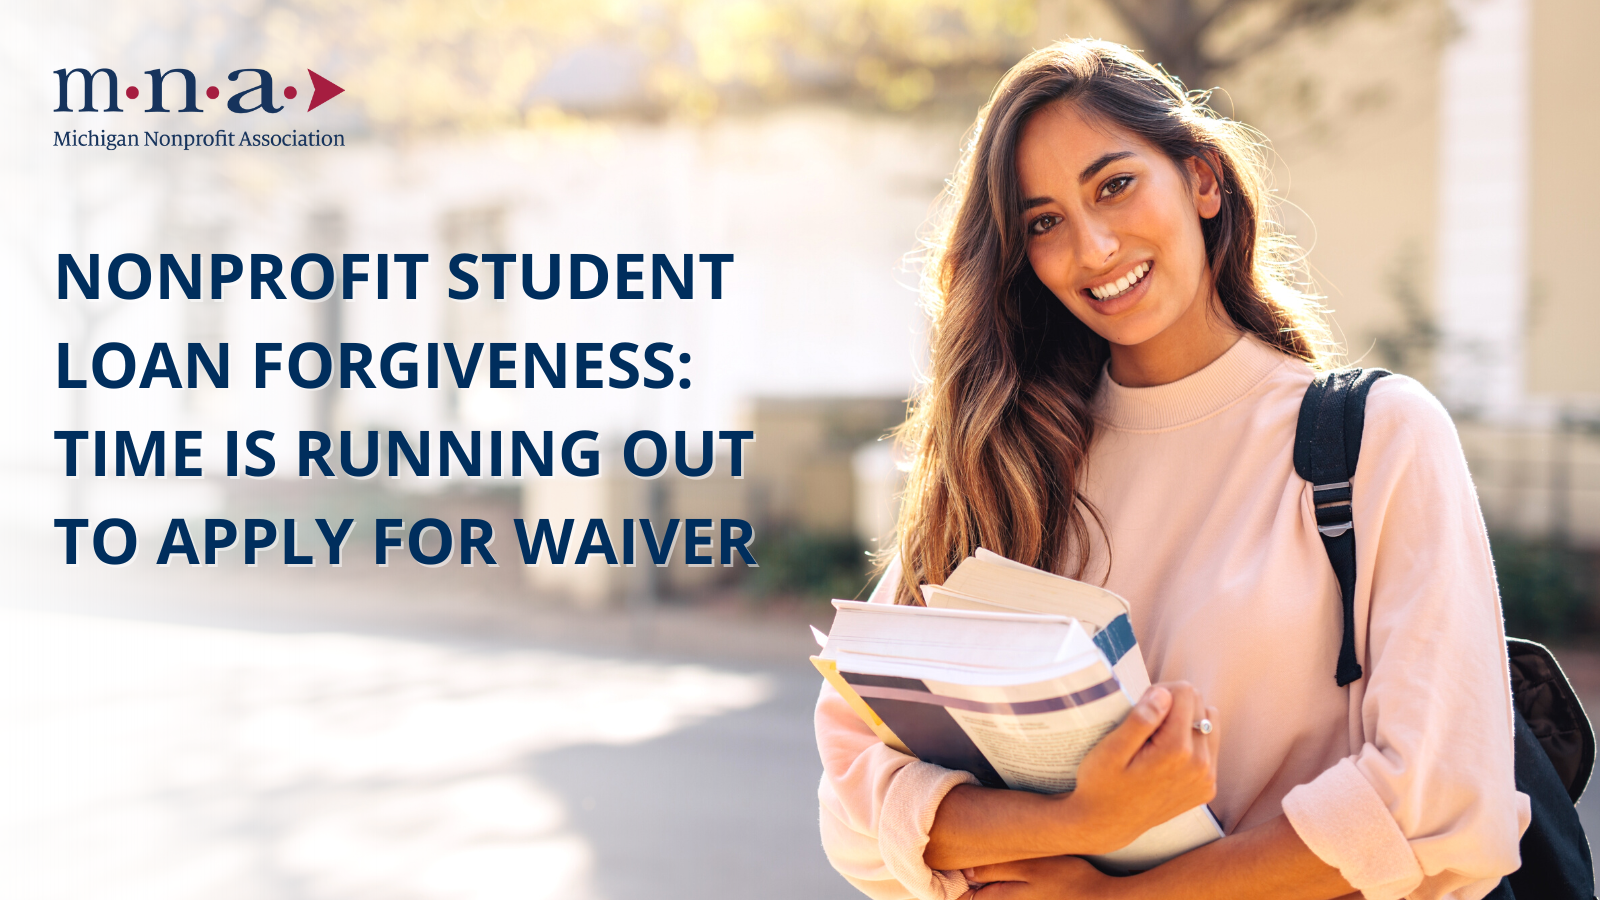 Nonprofit Student Loan Forgiveness: Time is Running Out to Apply for Waiver